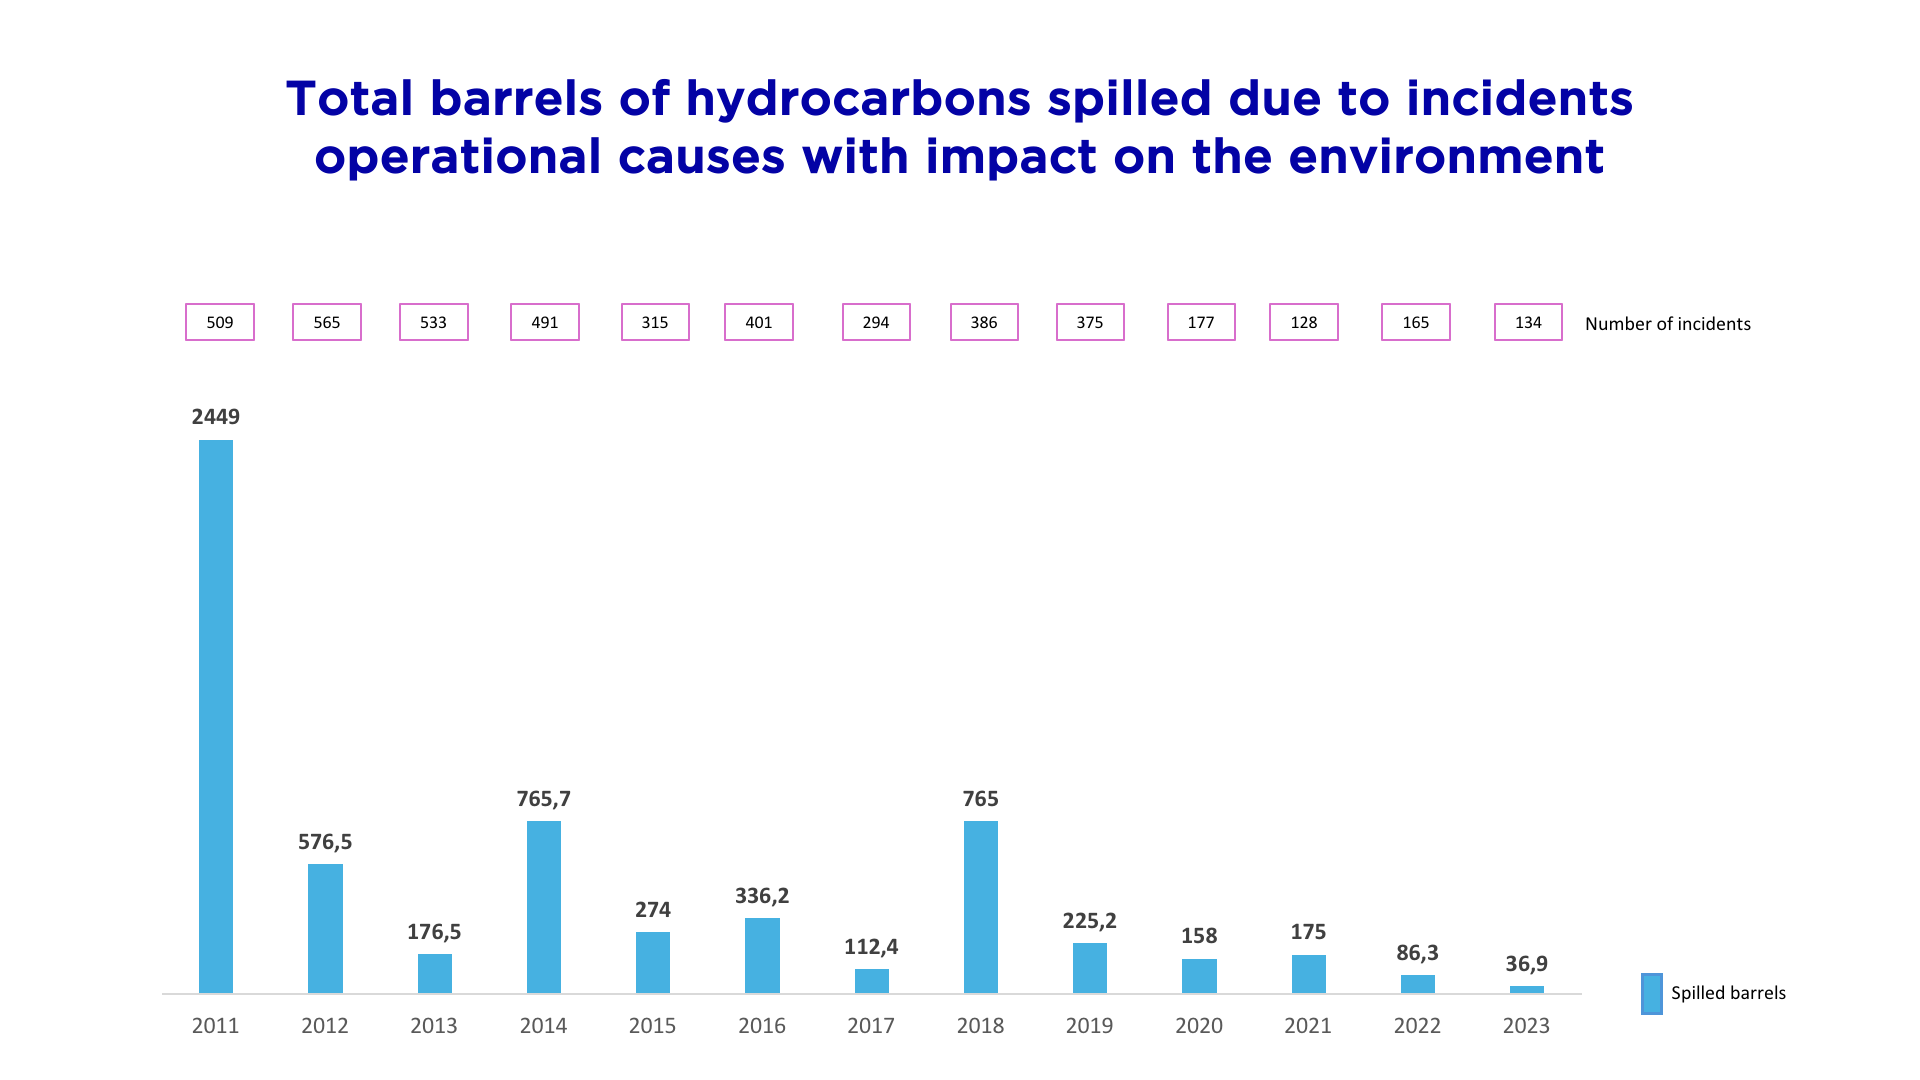 Incidents with hydrocarbon spills greater than 1 barrel due to operational causes with potential impact on the environment